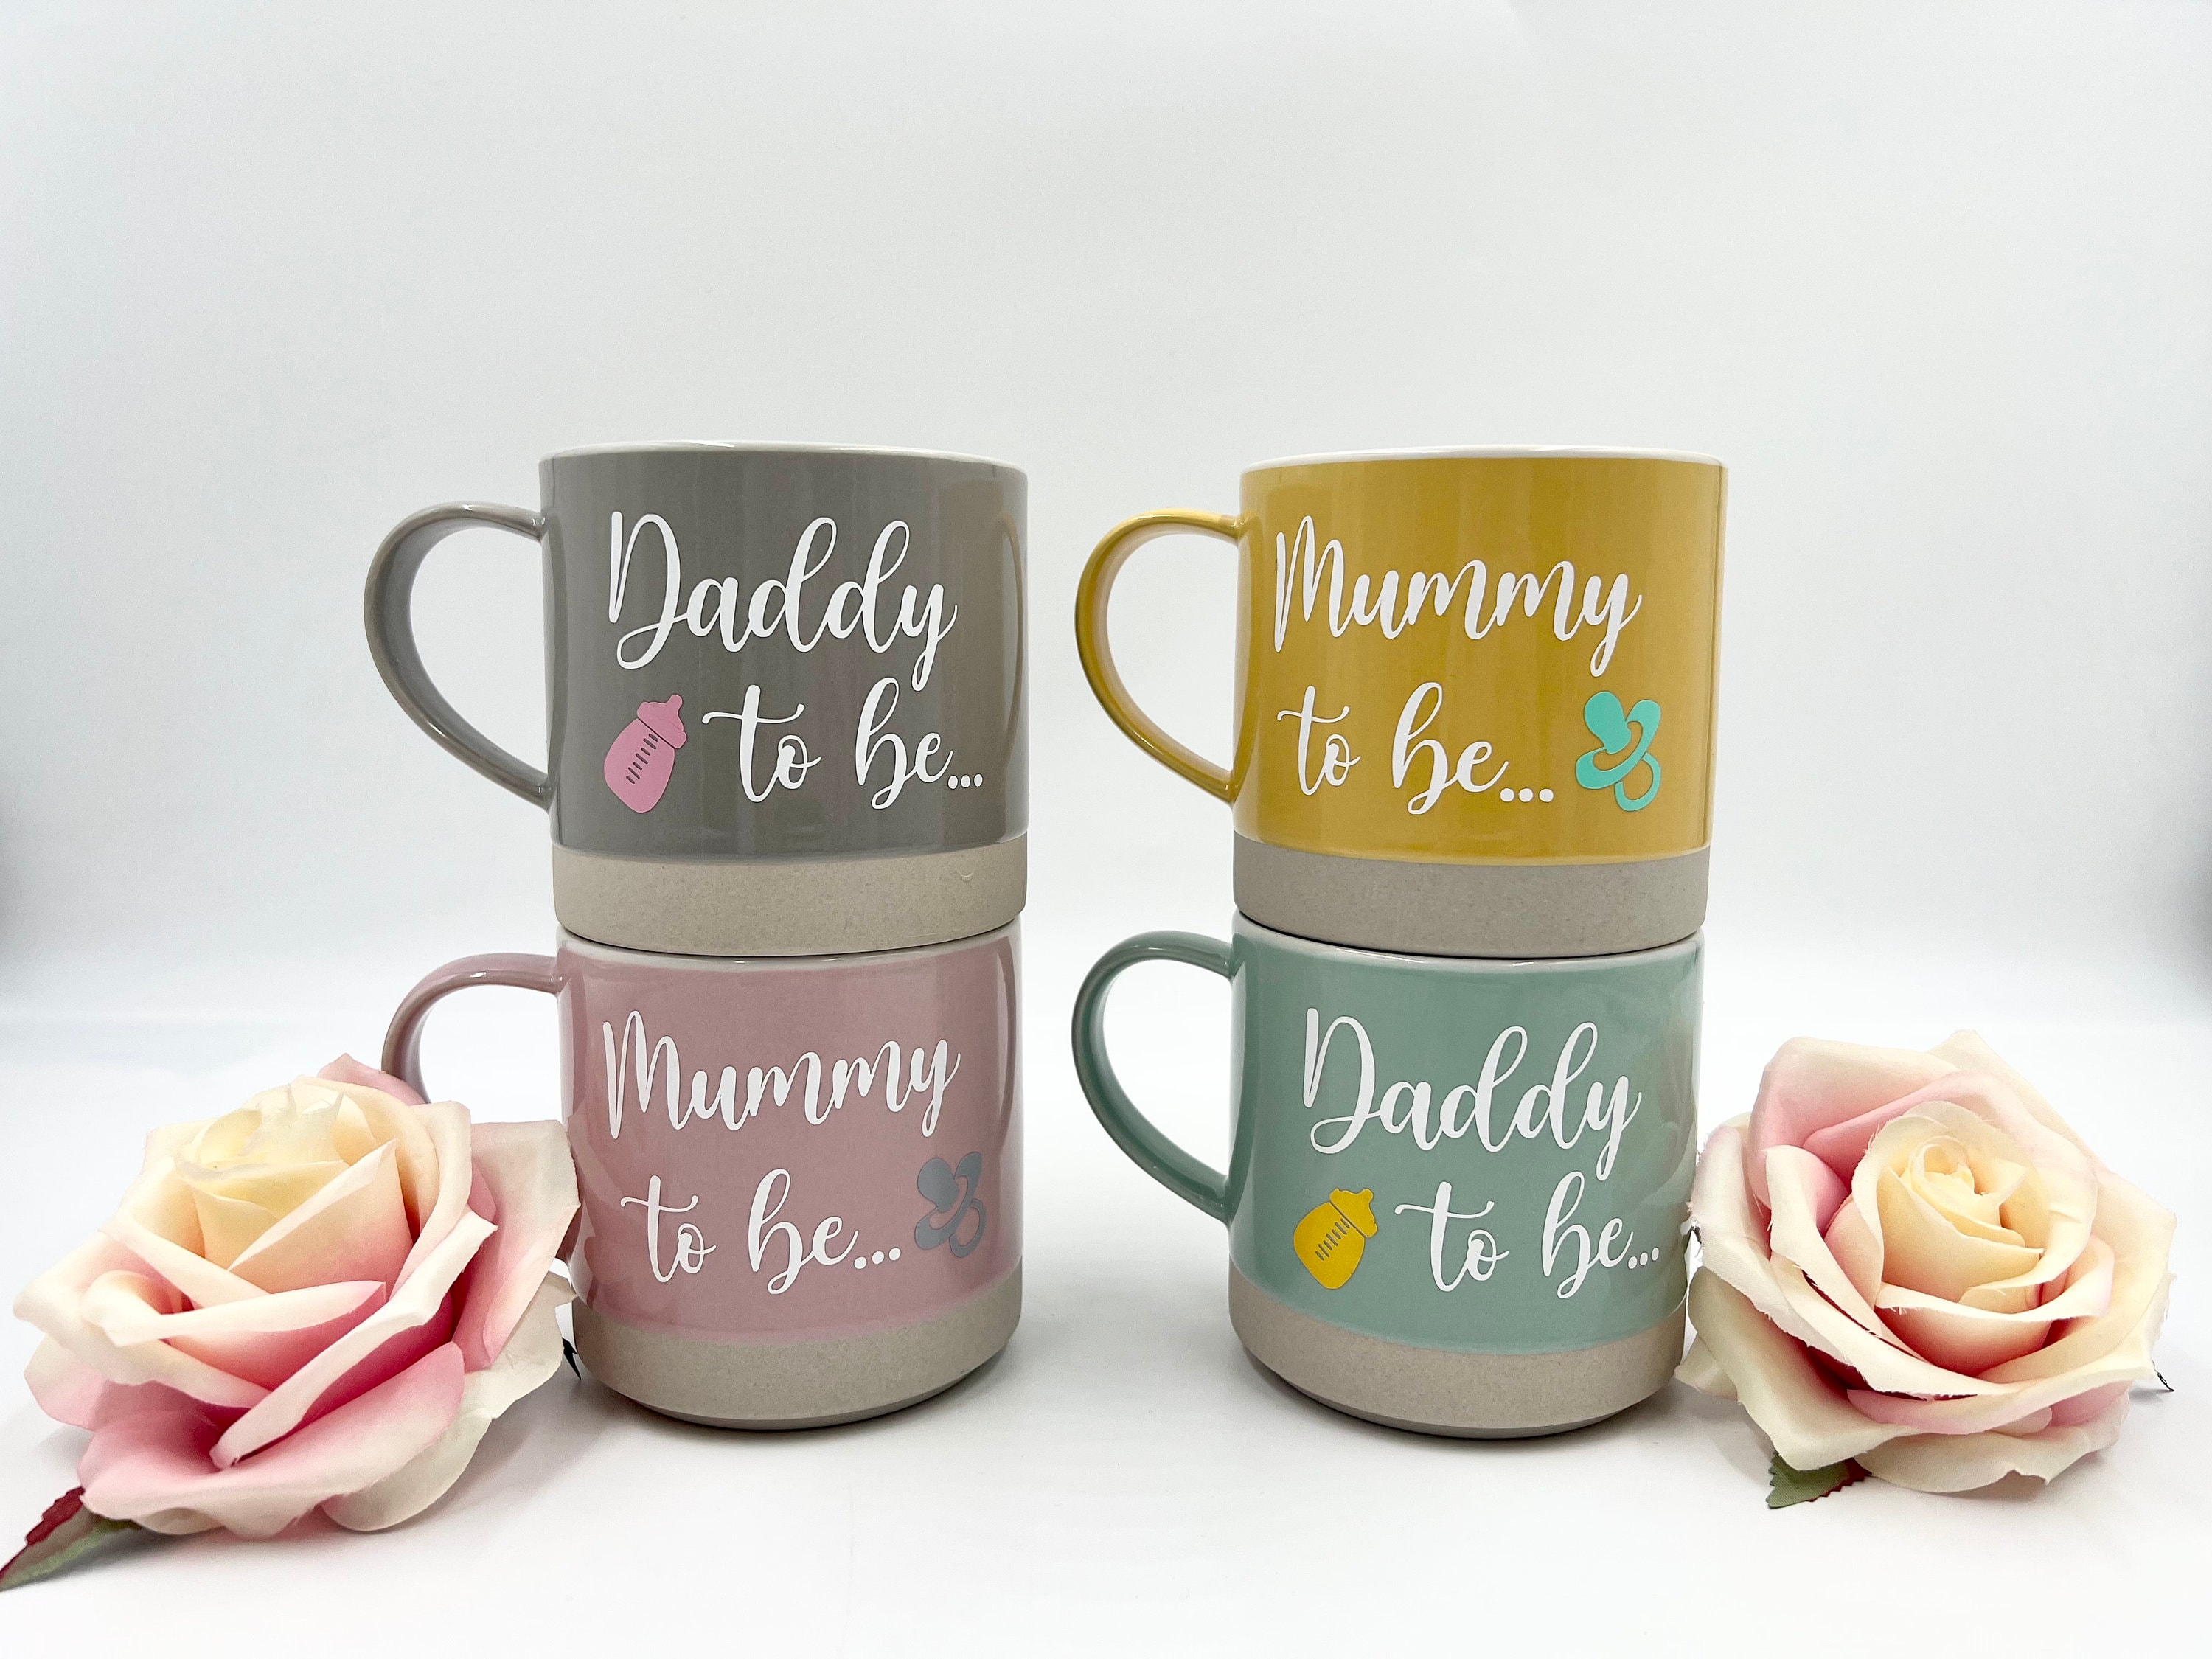 New Parent Gift, Baby Shower Gifts, New Parents Gift, Personalised Gifts,  Personalised Mugs, Gift Set, Gift for New Parents, New Mum Gift 